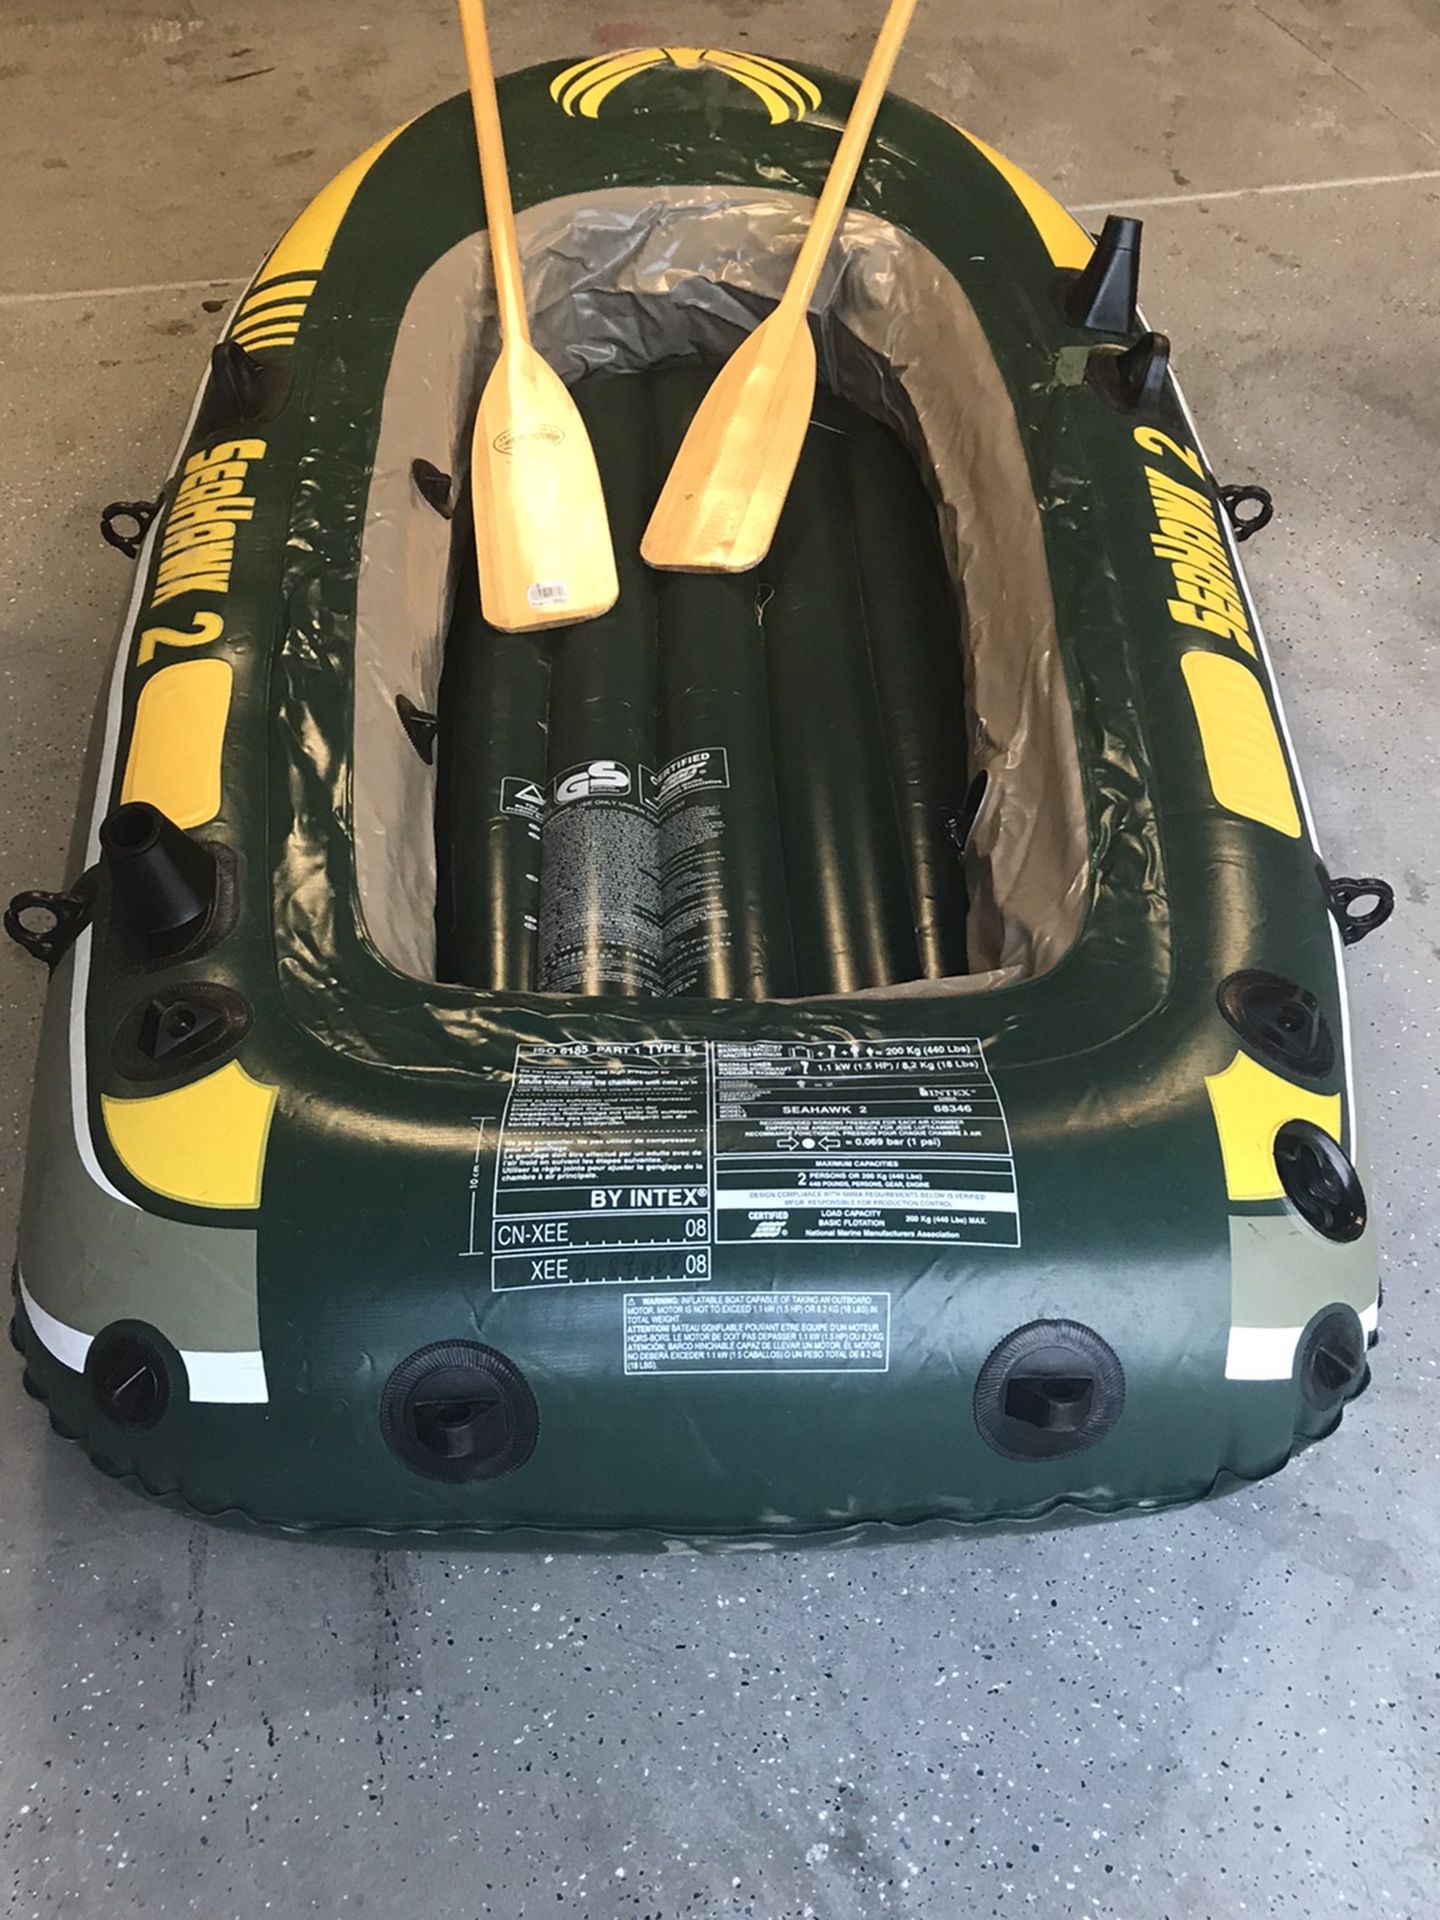 Inter Seahawk 11’7” inflatable boat set